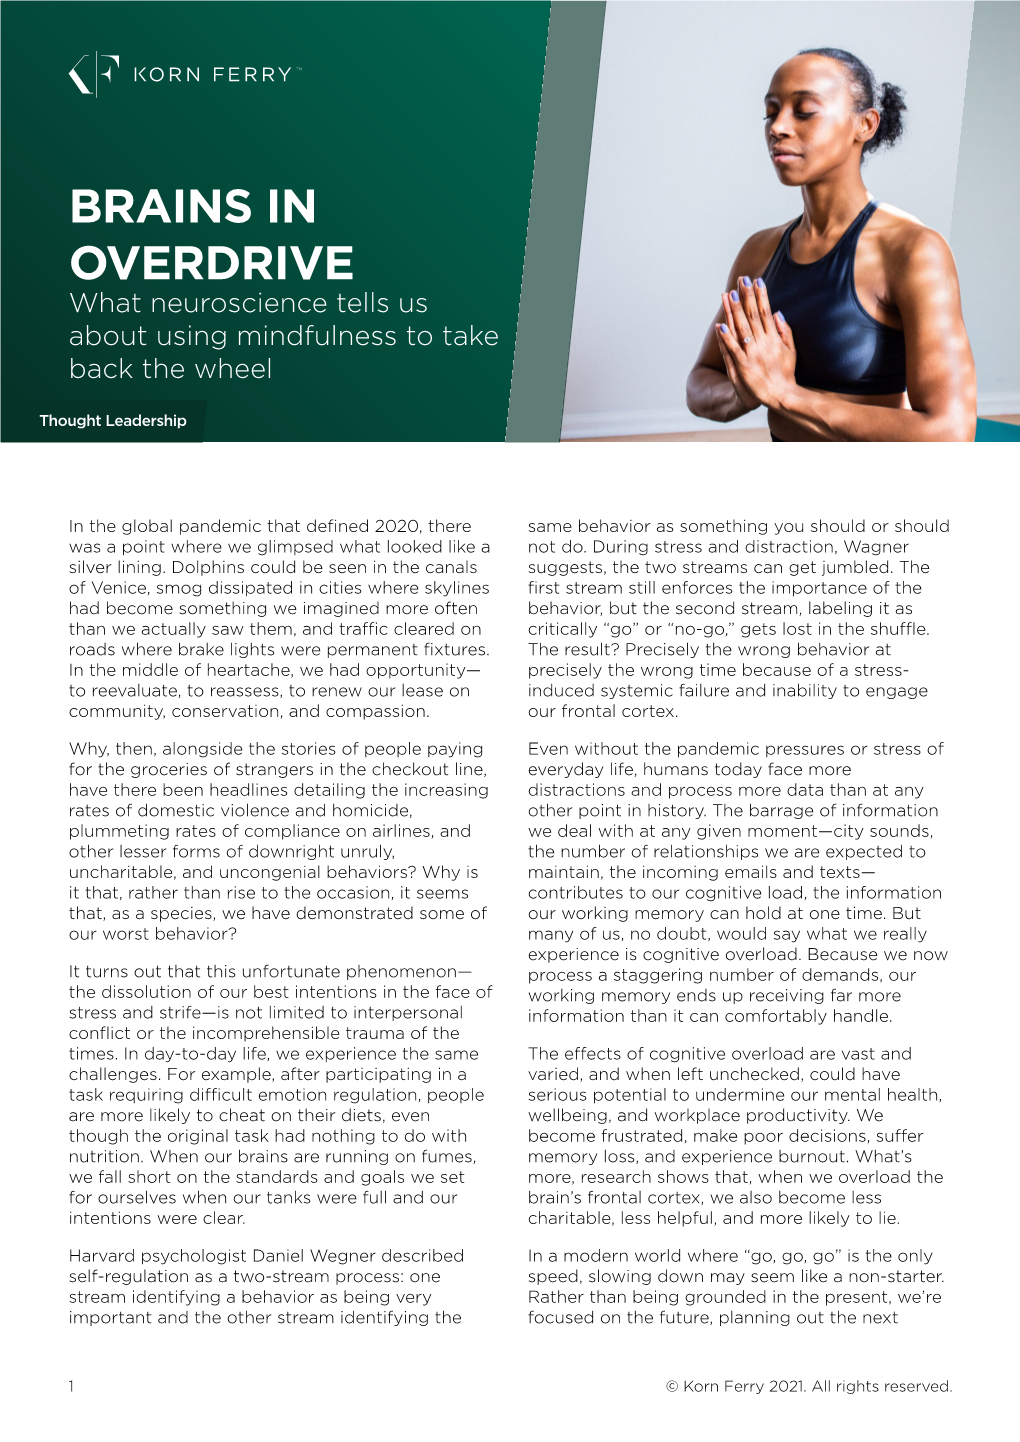 Mindfulness and Cognitive Overload: Brains in Overdrive